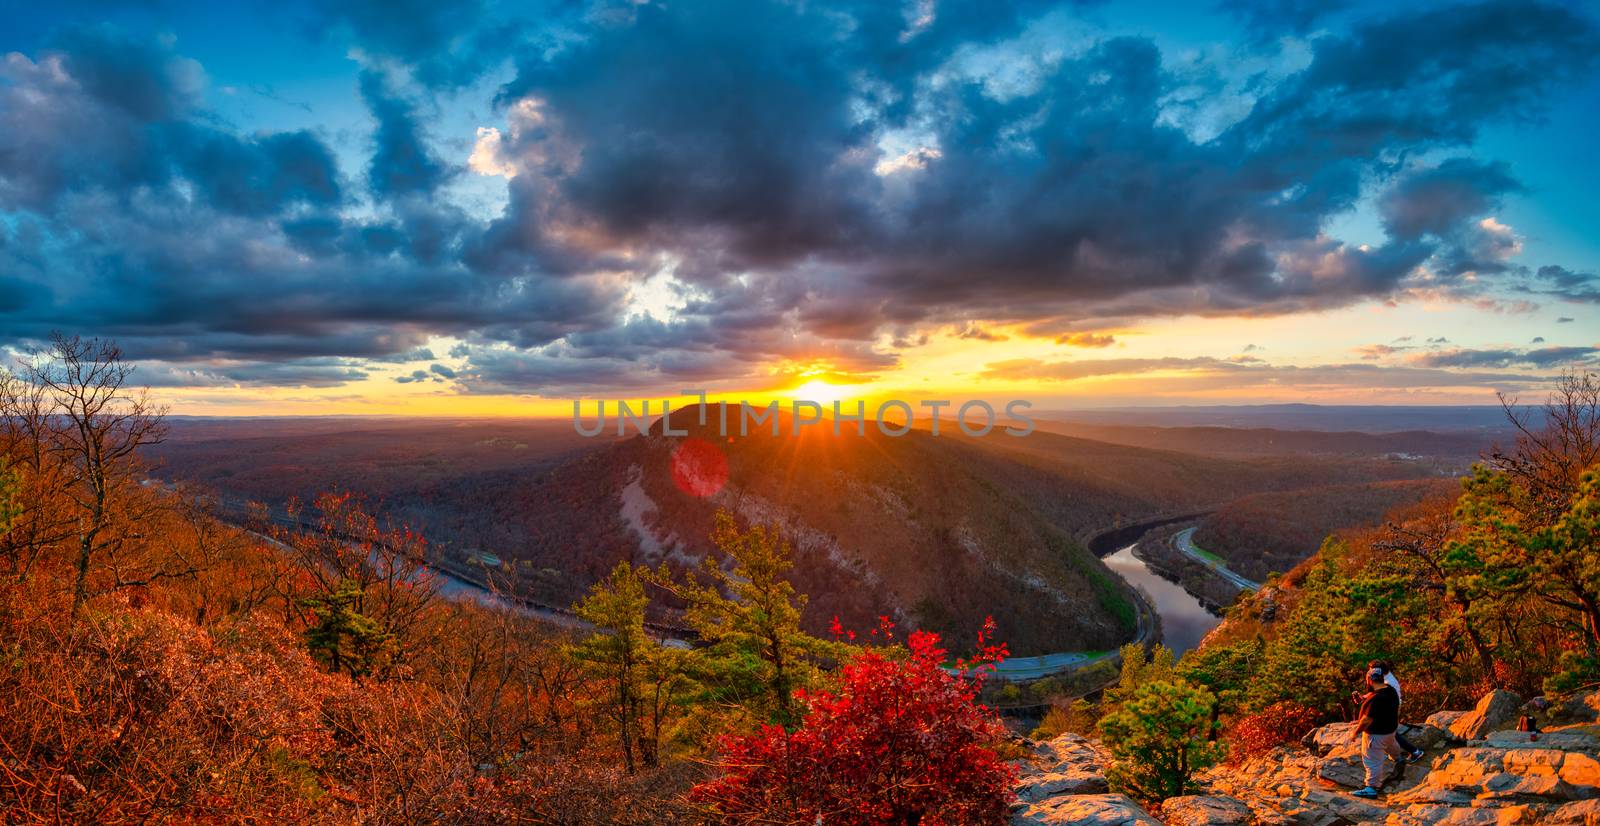 A Panoramic View of the Sunset From Atop Mount Tammany at the De by bju12290